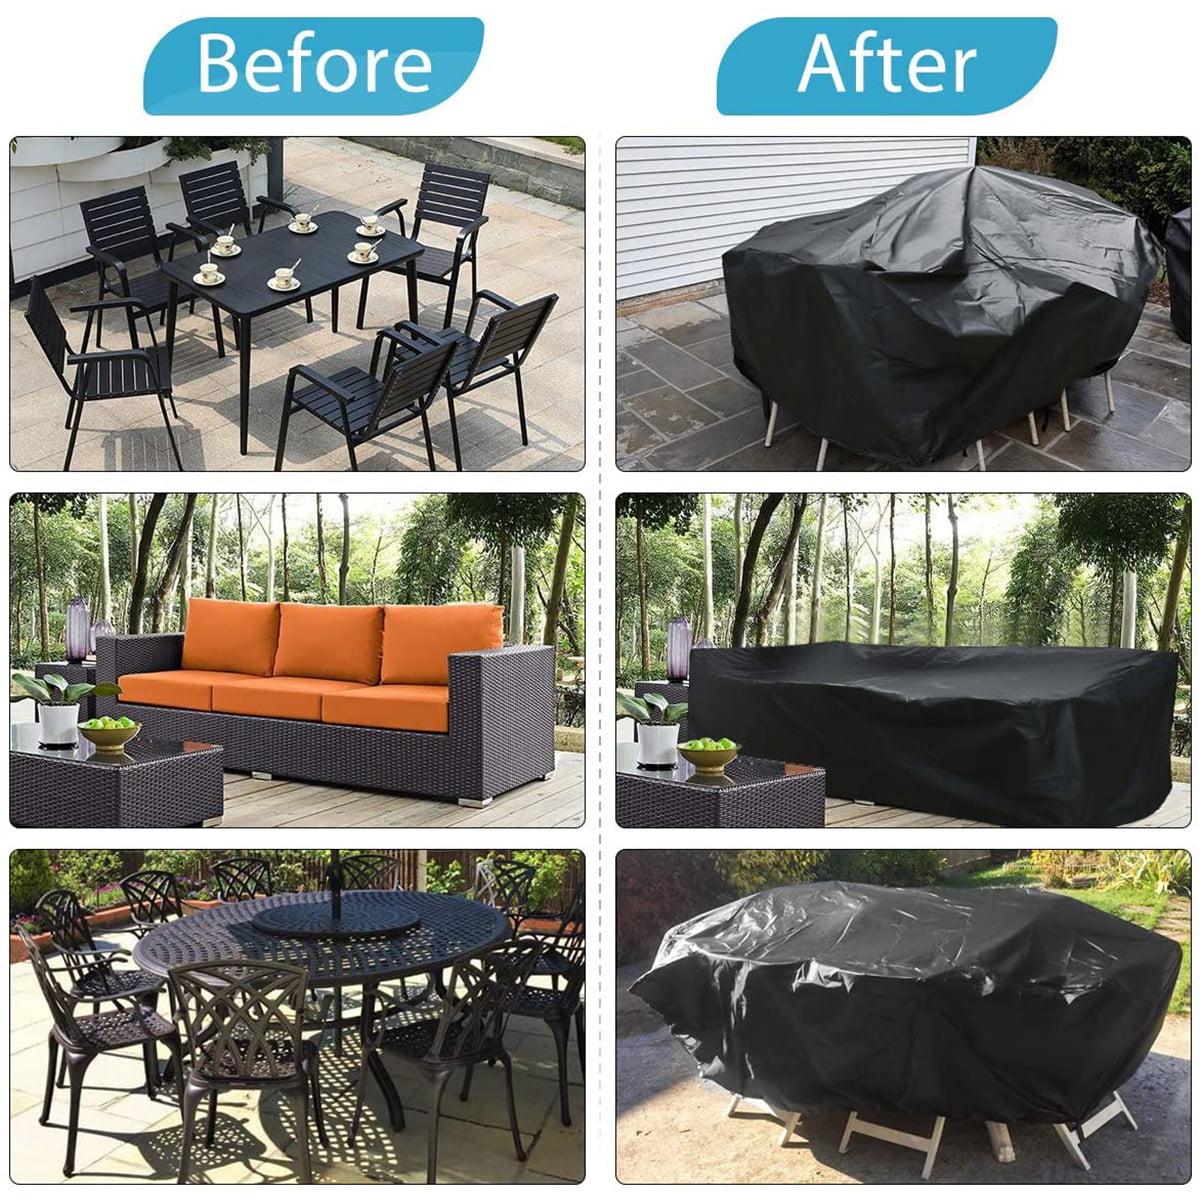 MEARTEVE Heavy Duty Patio Furniture Covers Waterproof Outdoor Patio Furniture Cover 124H x 71W x 36H Inch 600D Oxford Fabric Table Cover fit for 8 to 10 Seats Rain Snow Dust Wind-Proof 